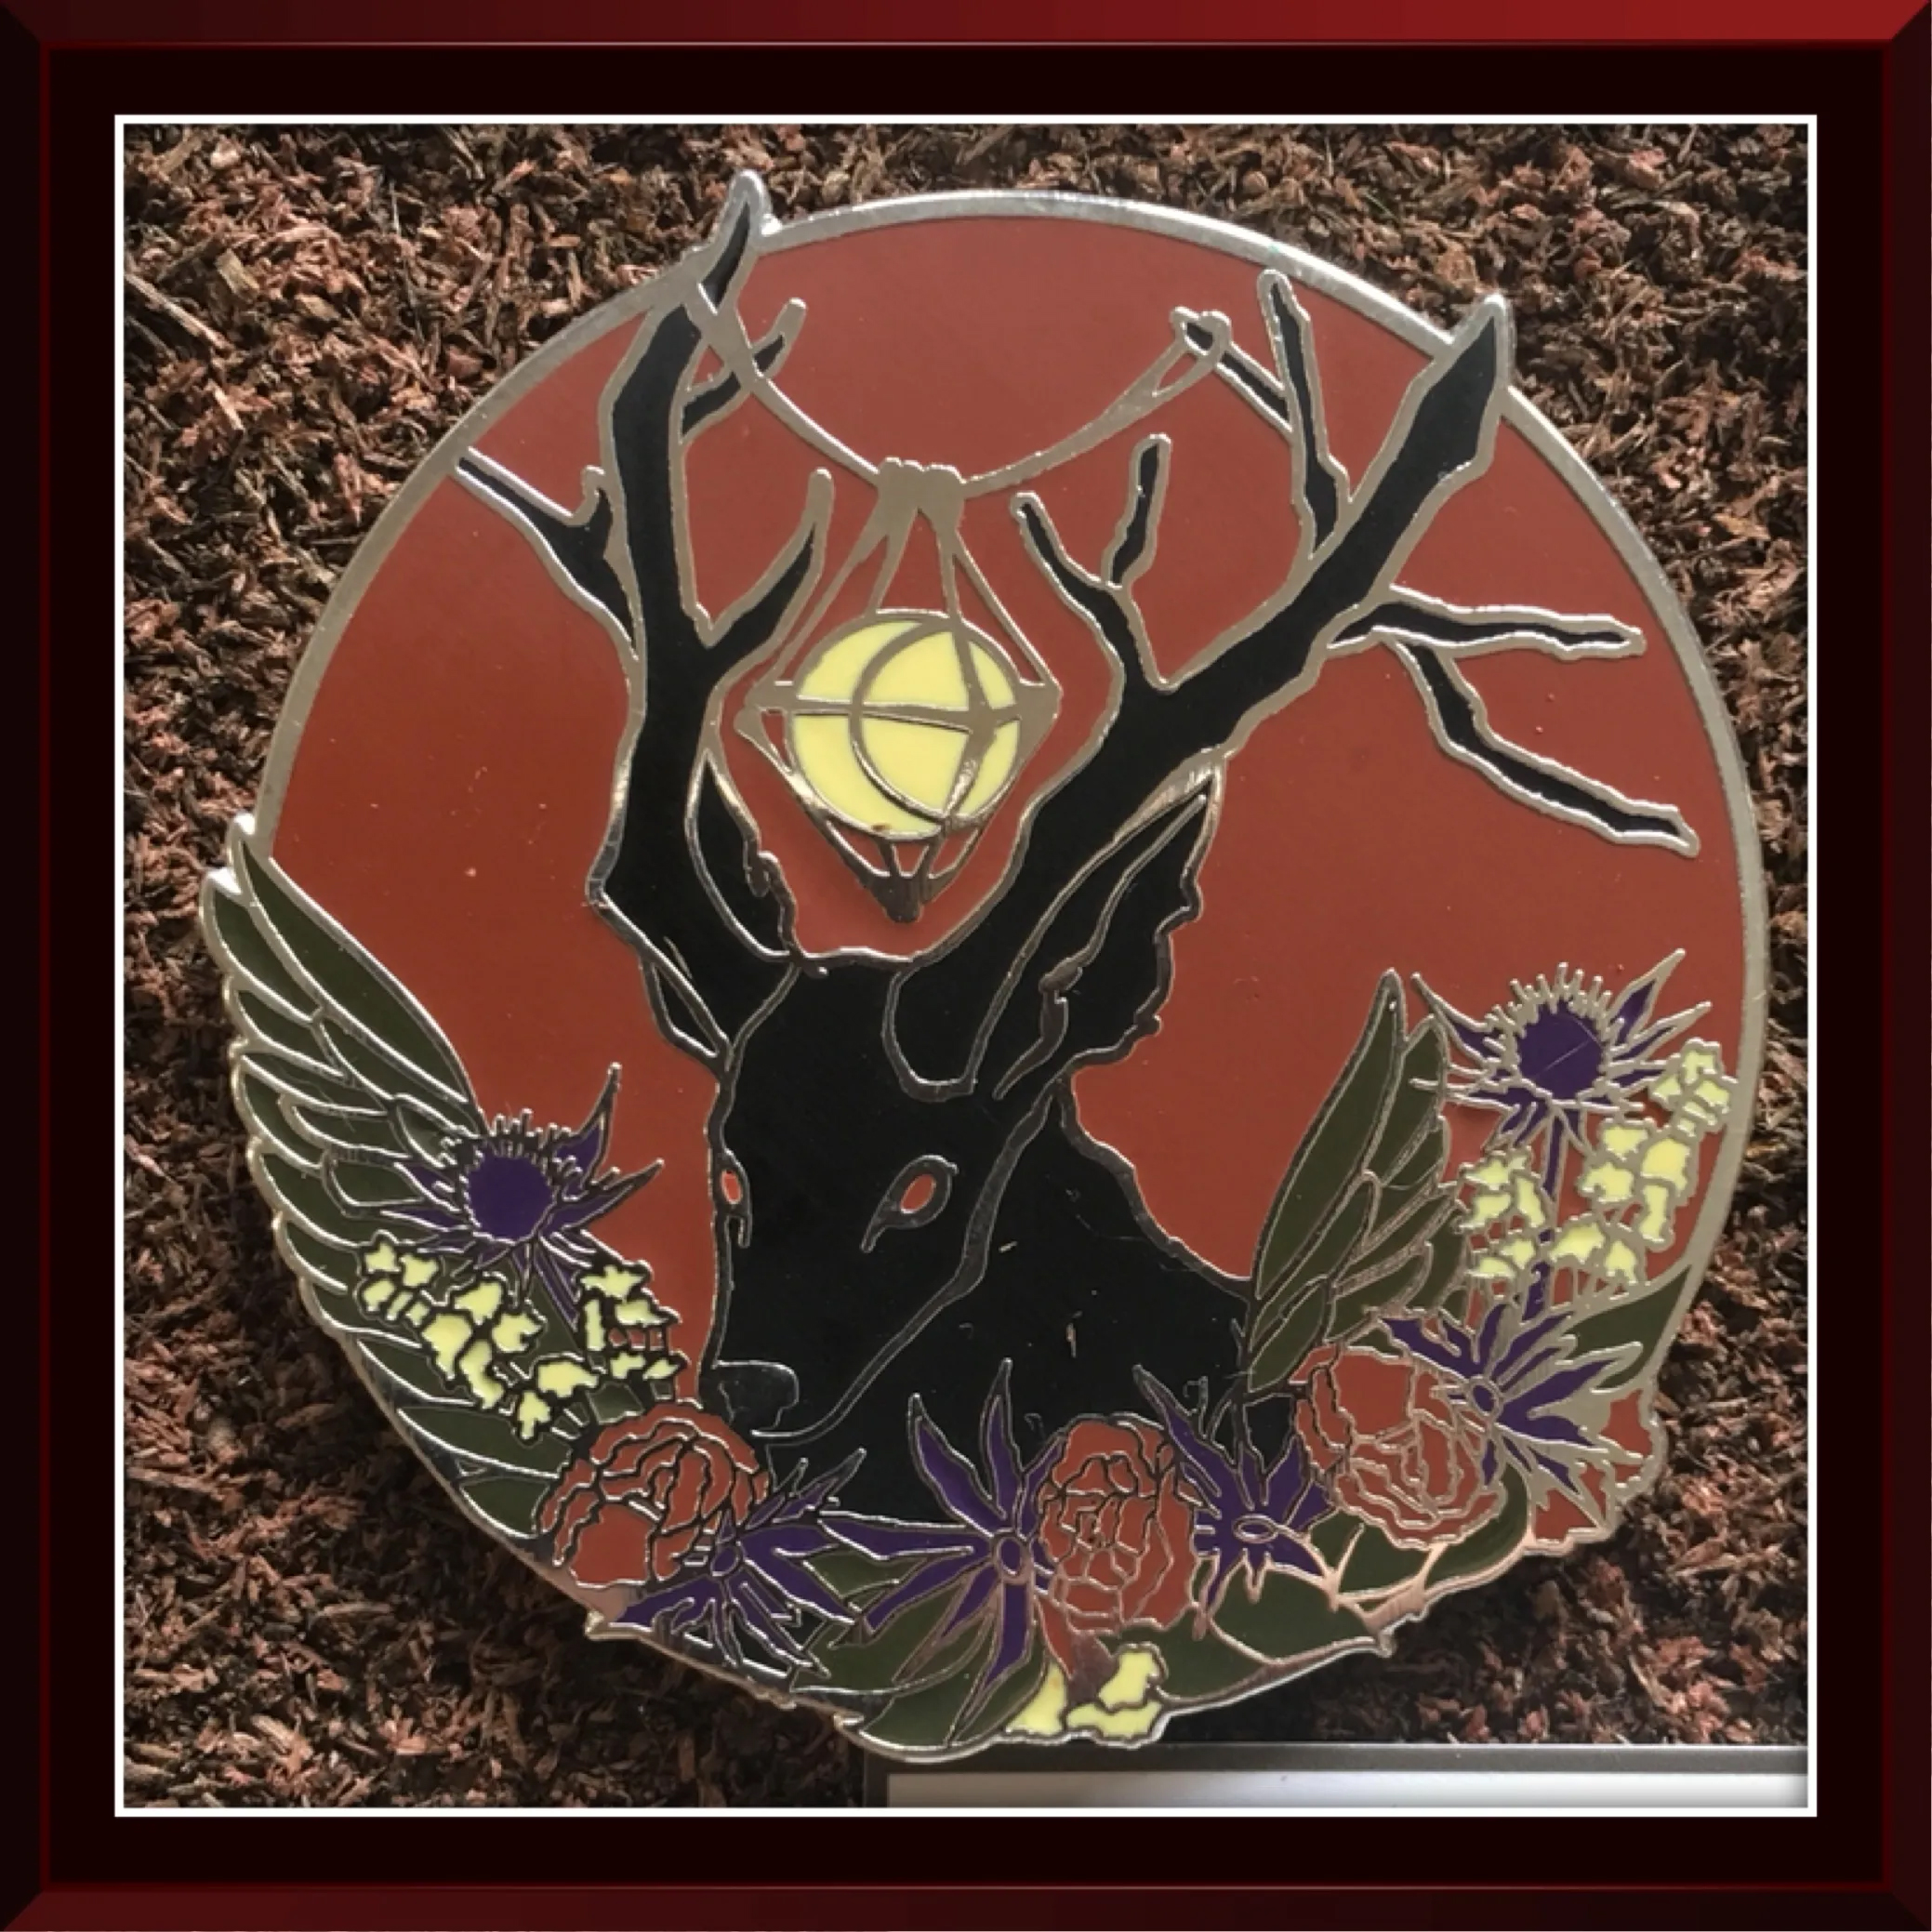 All Hallows Stag hard enamel pin by Three Muses Ink.